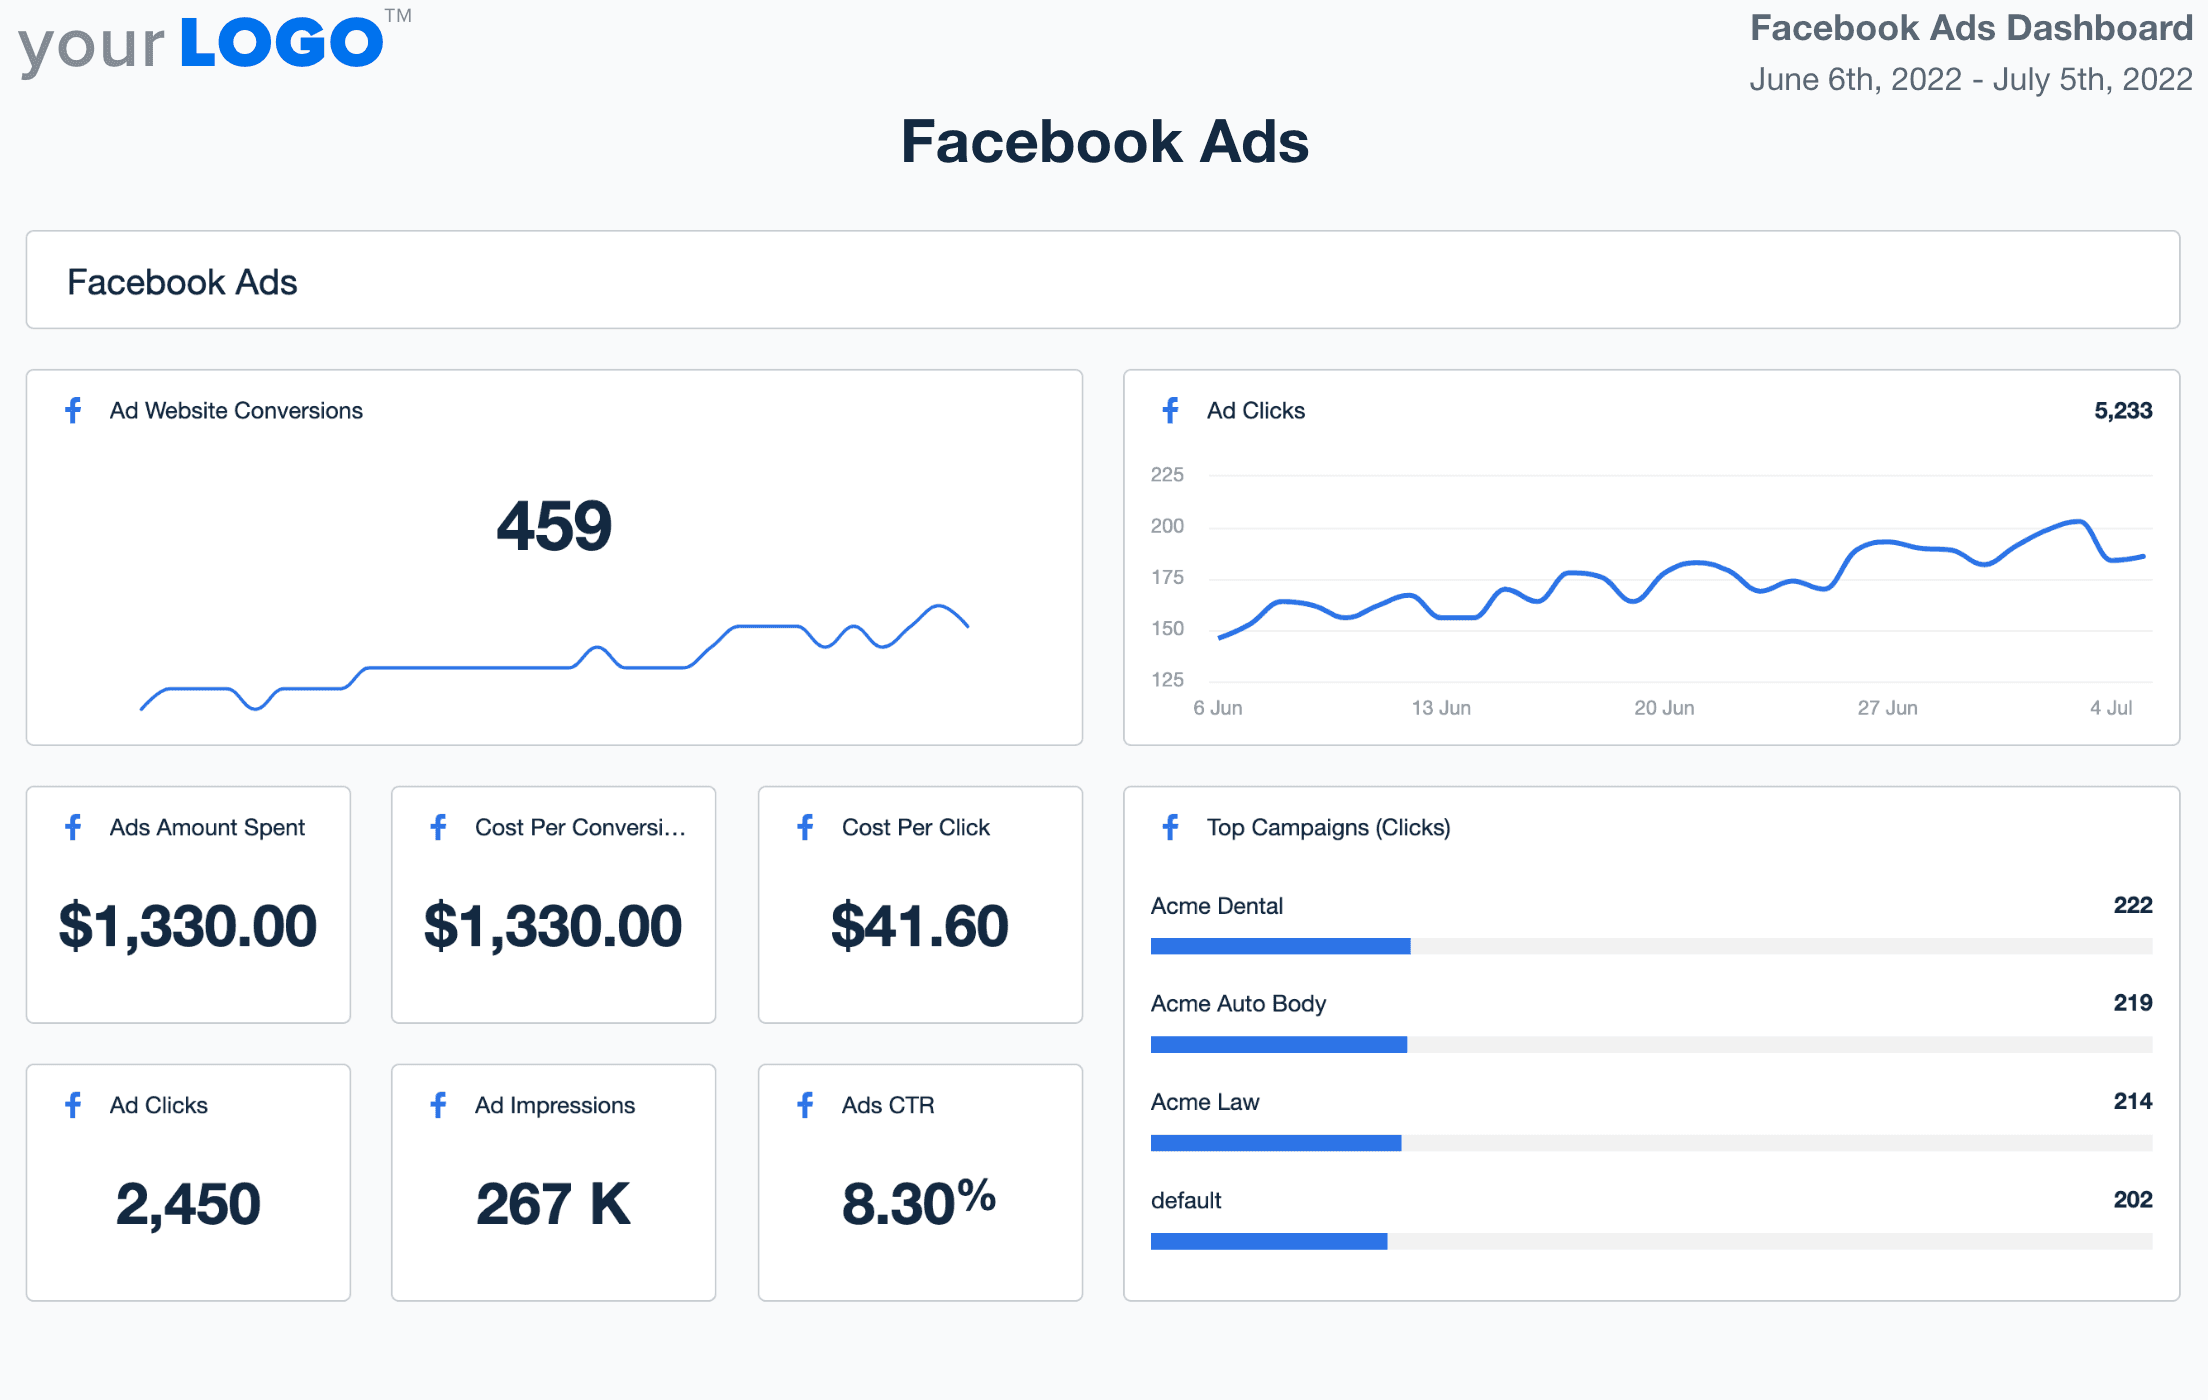 Facebook Ads Reporting Tool for Marketing Agencies AgencyAnalytics